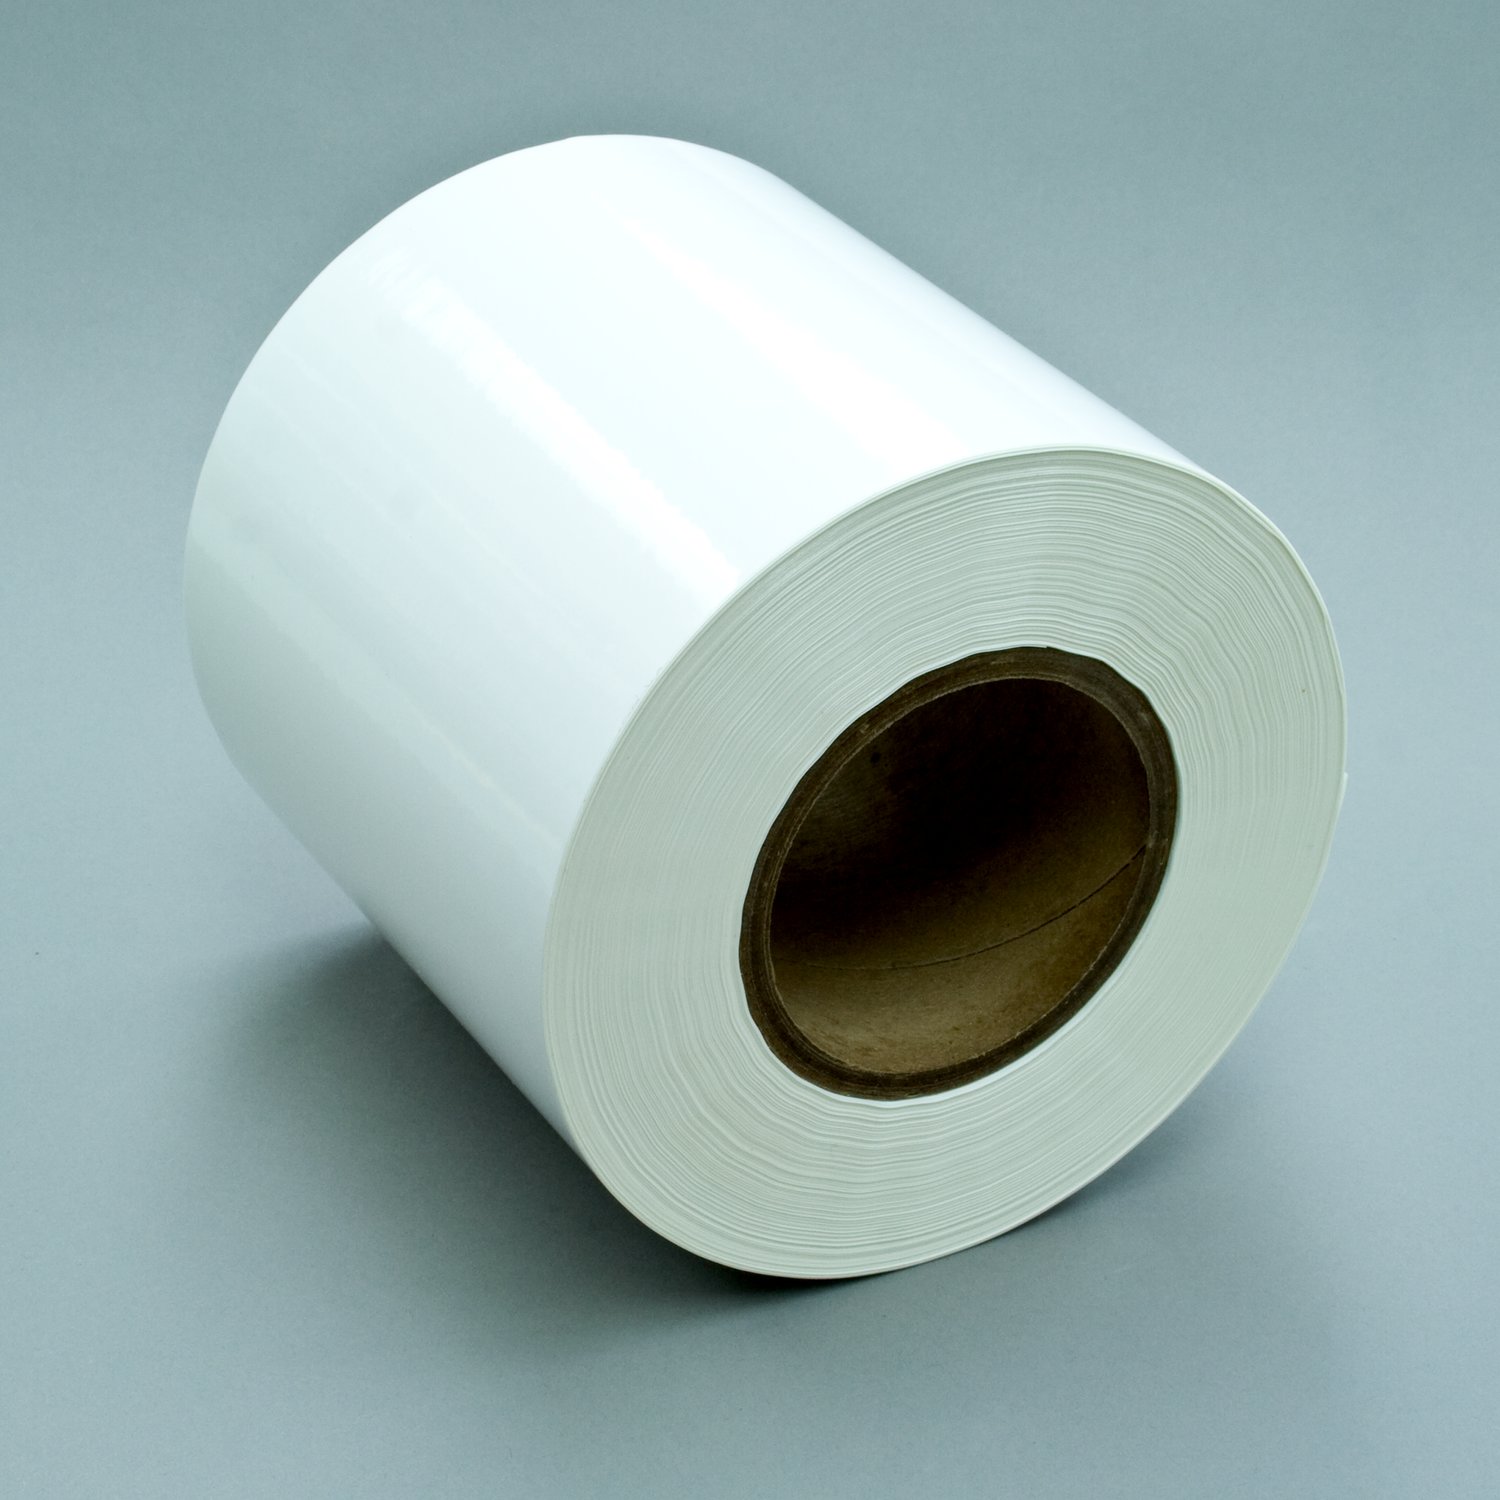 7000048834 - 3M Sheet and Screen Label Material 7931, Radiant White, 508 mm x 686 mm, 100 Sheet/Case